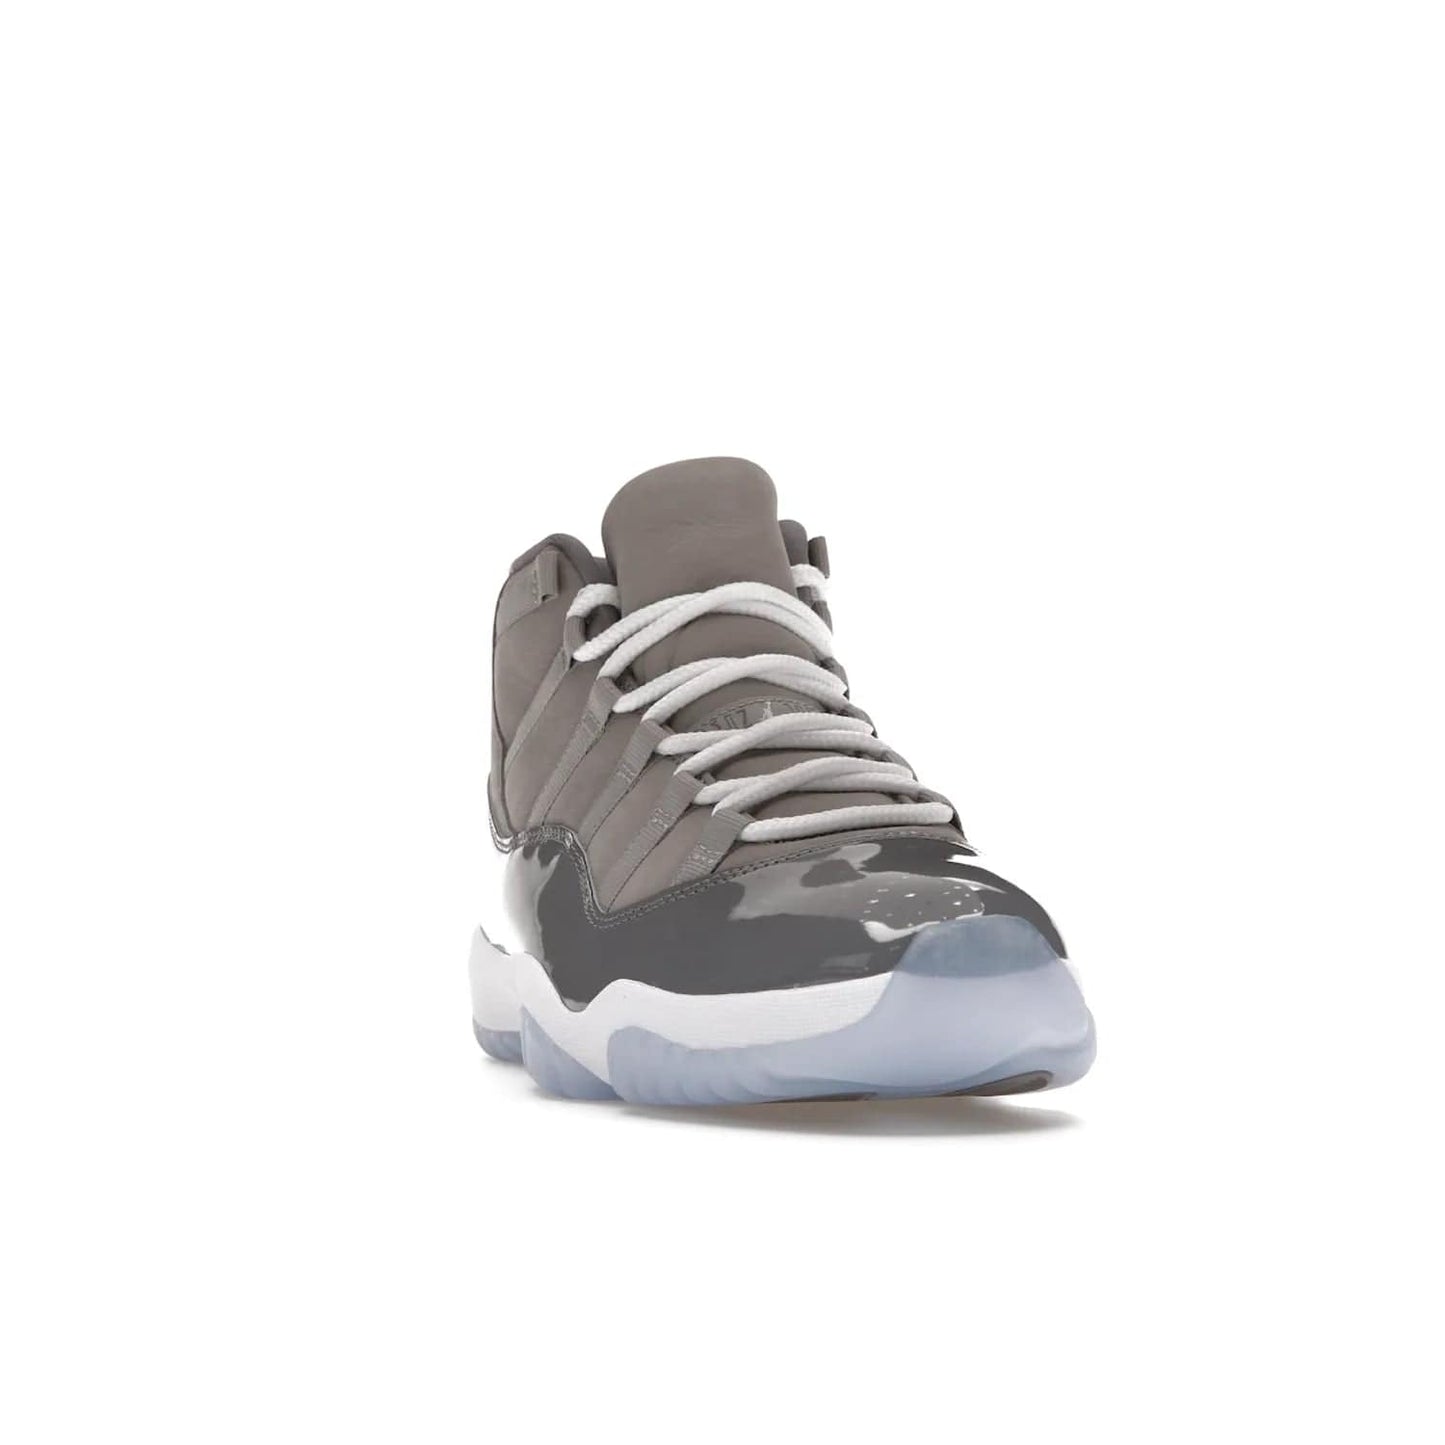 Jordan 11 Retro Cool Grey (2021) - Image 8 - Only at www.BallersClubKickz.com - Shop the Air Jordan 11 Retro Cool Grey (2021) for a must-have sneaker with a Cool Grey Durabuck upper, patent leather overlays, signature Jumpman embroidery, a white midsole, icy blue translucent outsole, and Multi-Color accents.  Released in December 2021 for $225.